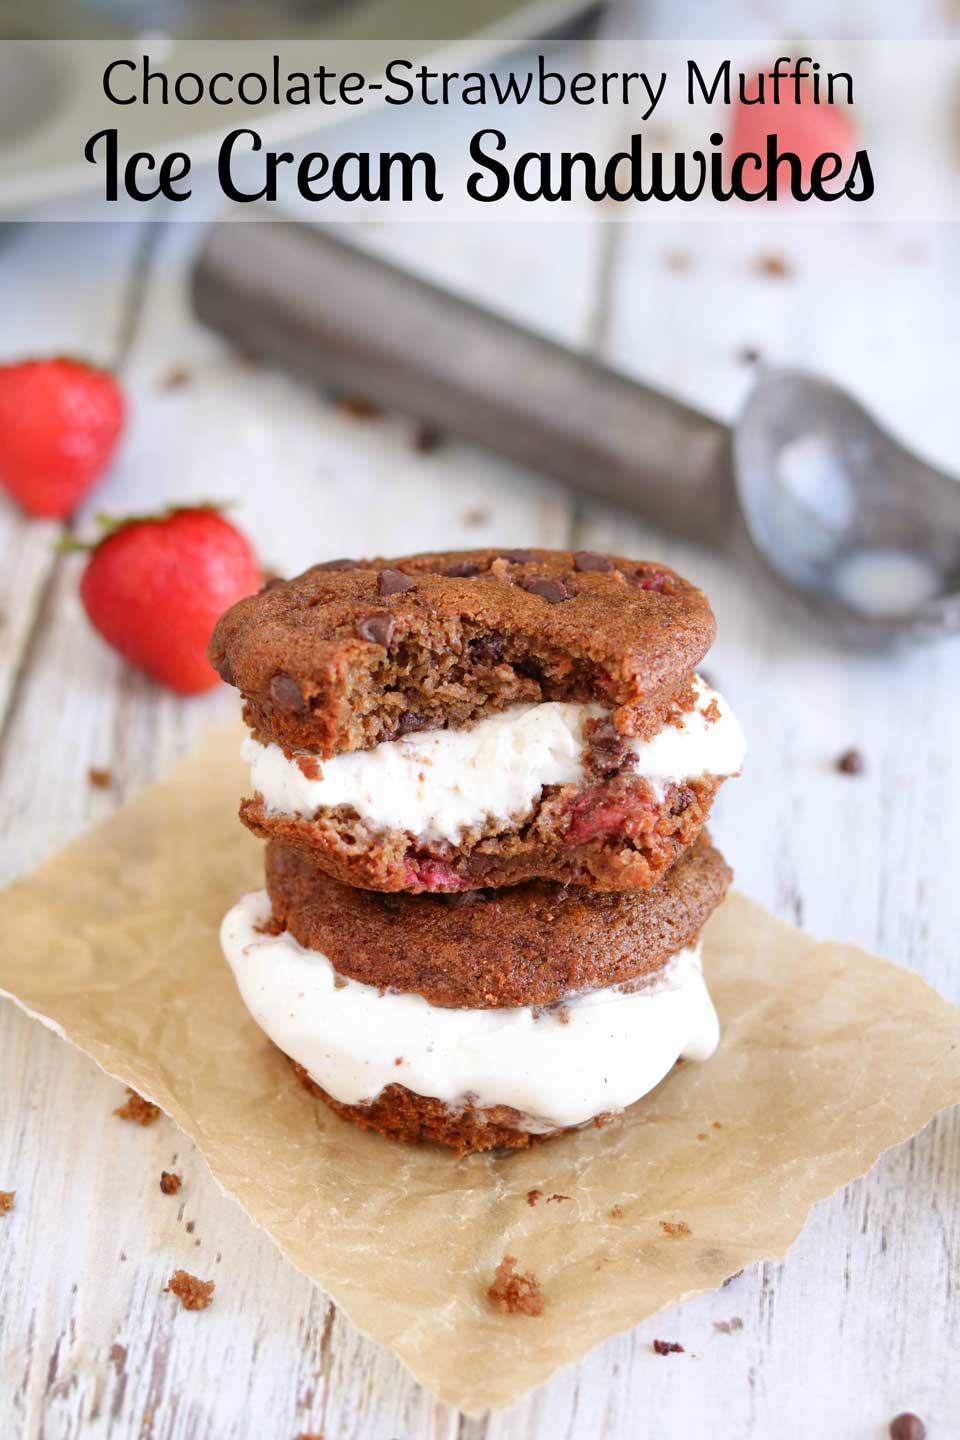 Take delicious, healthy breakfast muffins … add ice cream … and you’ve got a decadent dessert! Muffin ice cream sandwiches! Bursting with fresh strawberries and double chocolate! One batch of muffins = two great recipes! | www.TwoHealthyKitchens.com